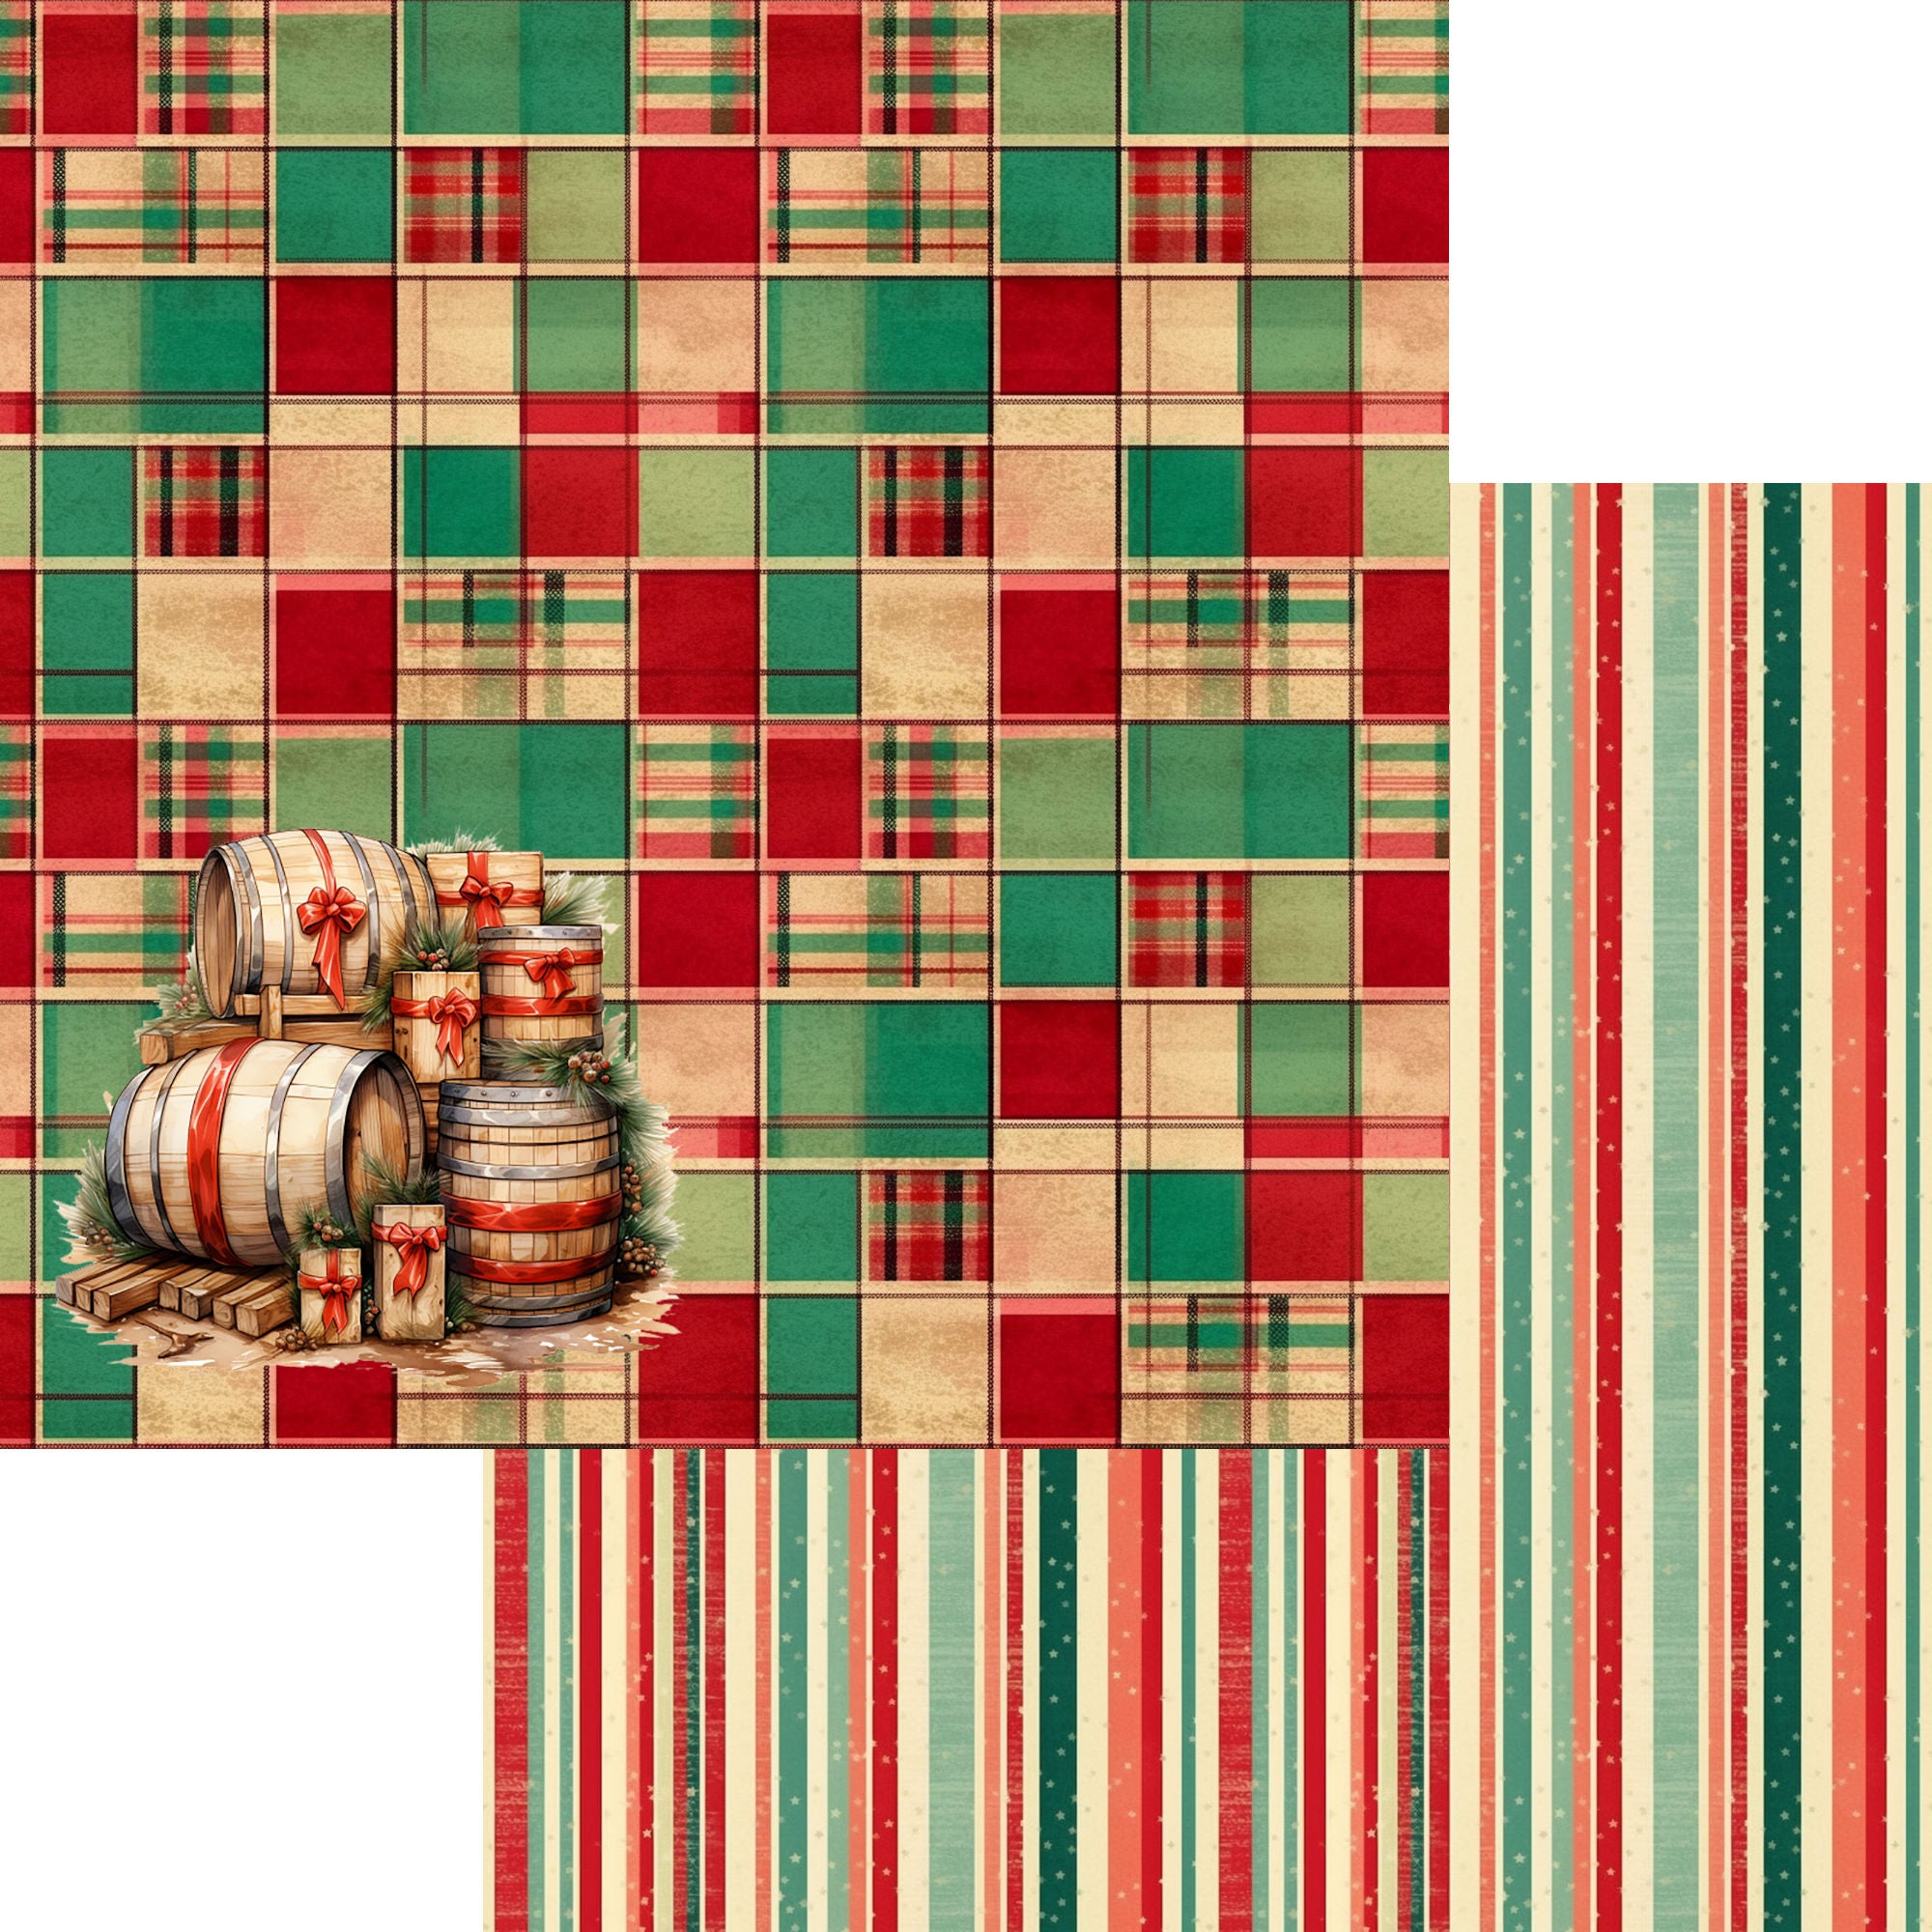 Cowboy Christmas Collection Barrels of Christmas Joy 12 x 12 Double-Sided Scrapbook Paper by SSC Designs